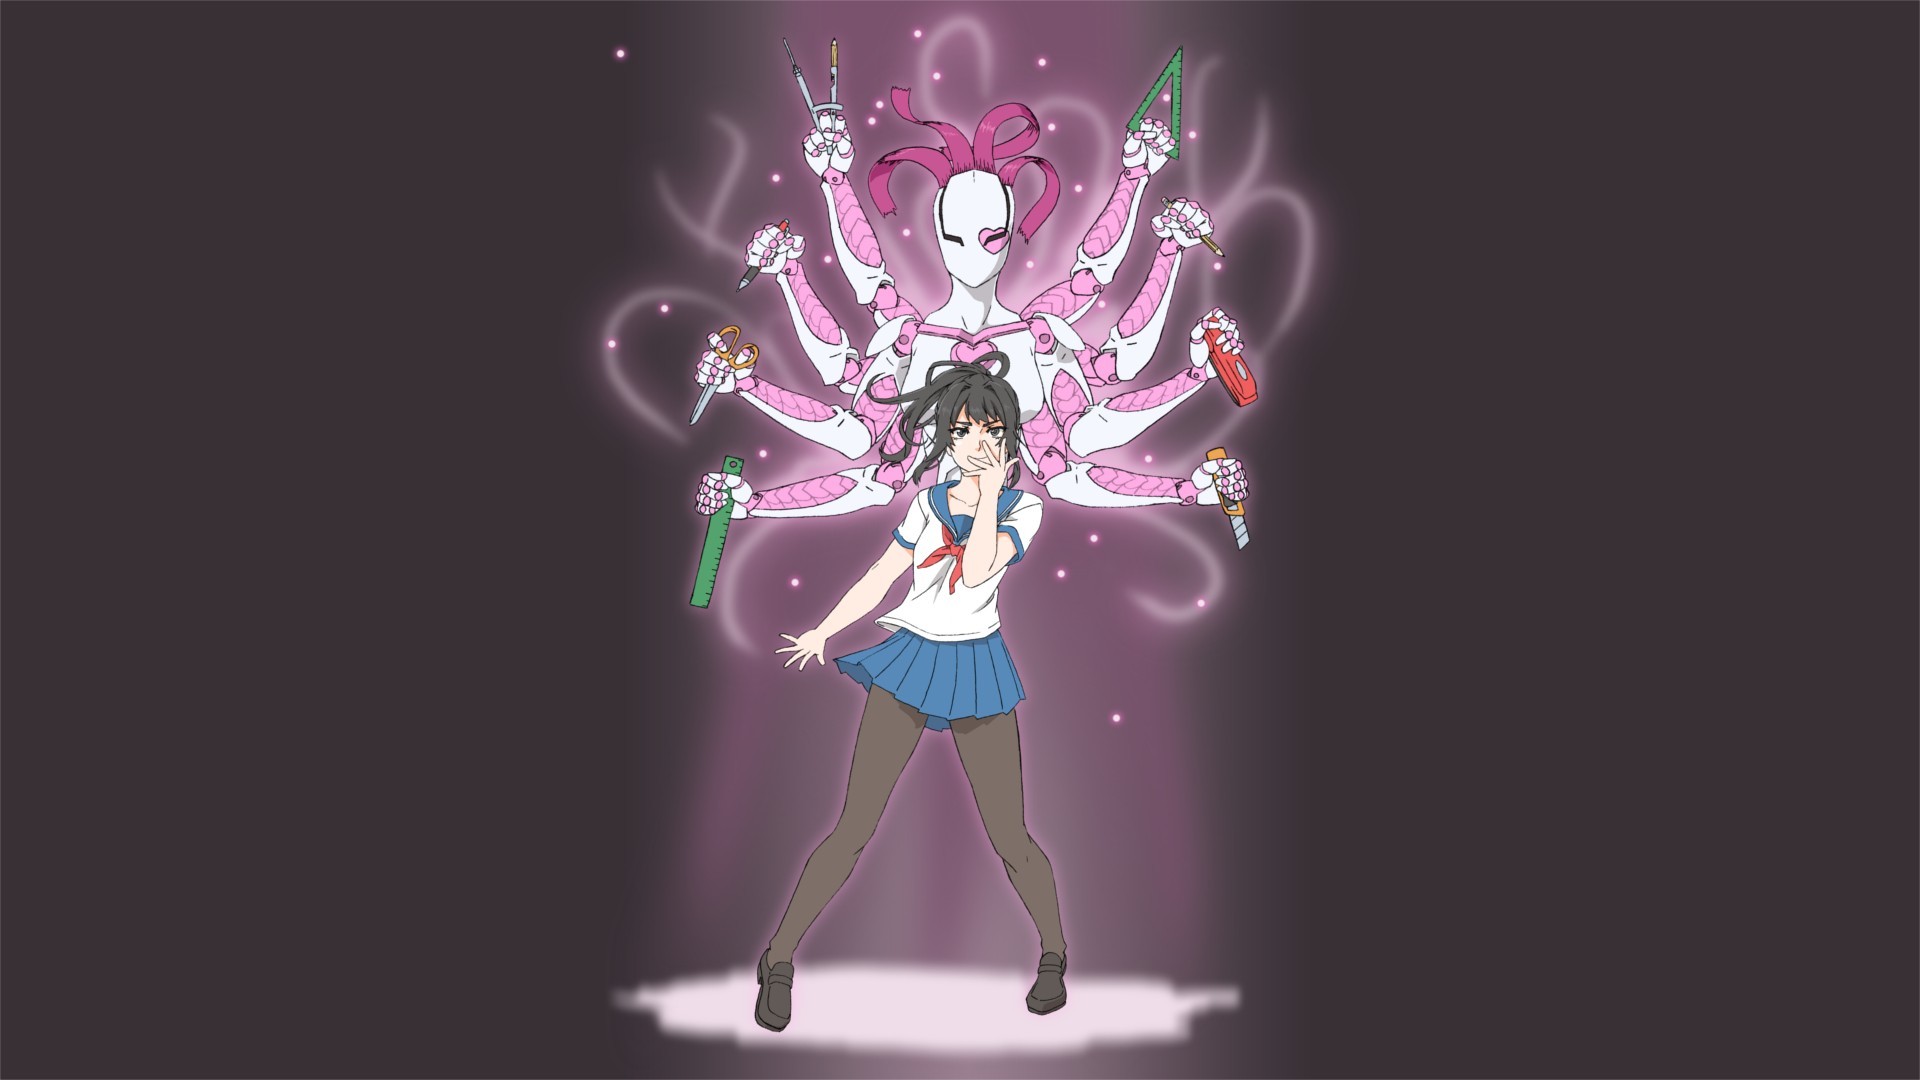 1920x1080 yandere simulator fan club images yandere wallpaper HD wallpaper and  background photos